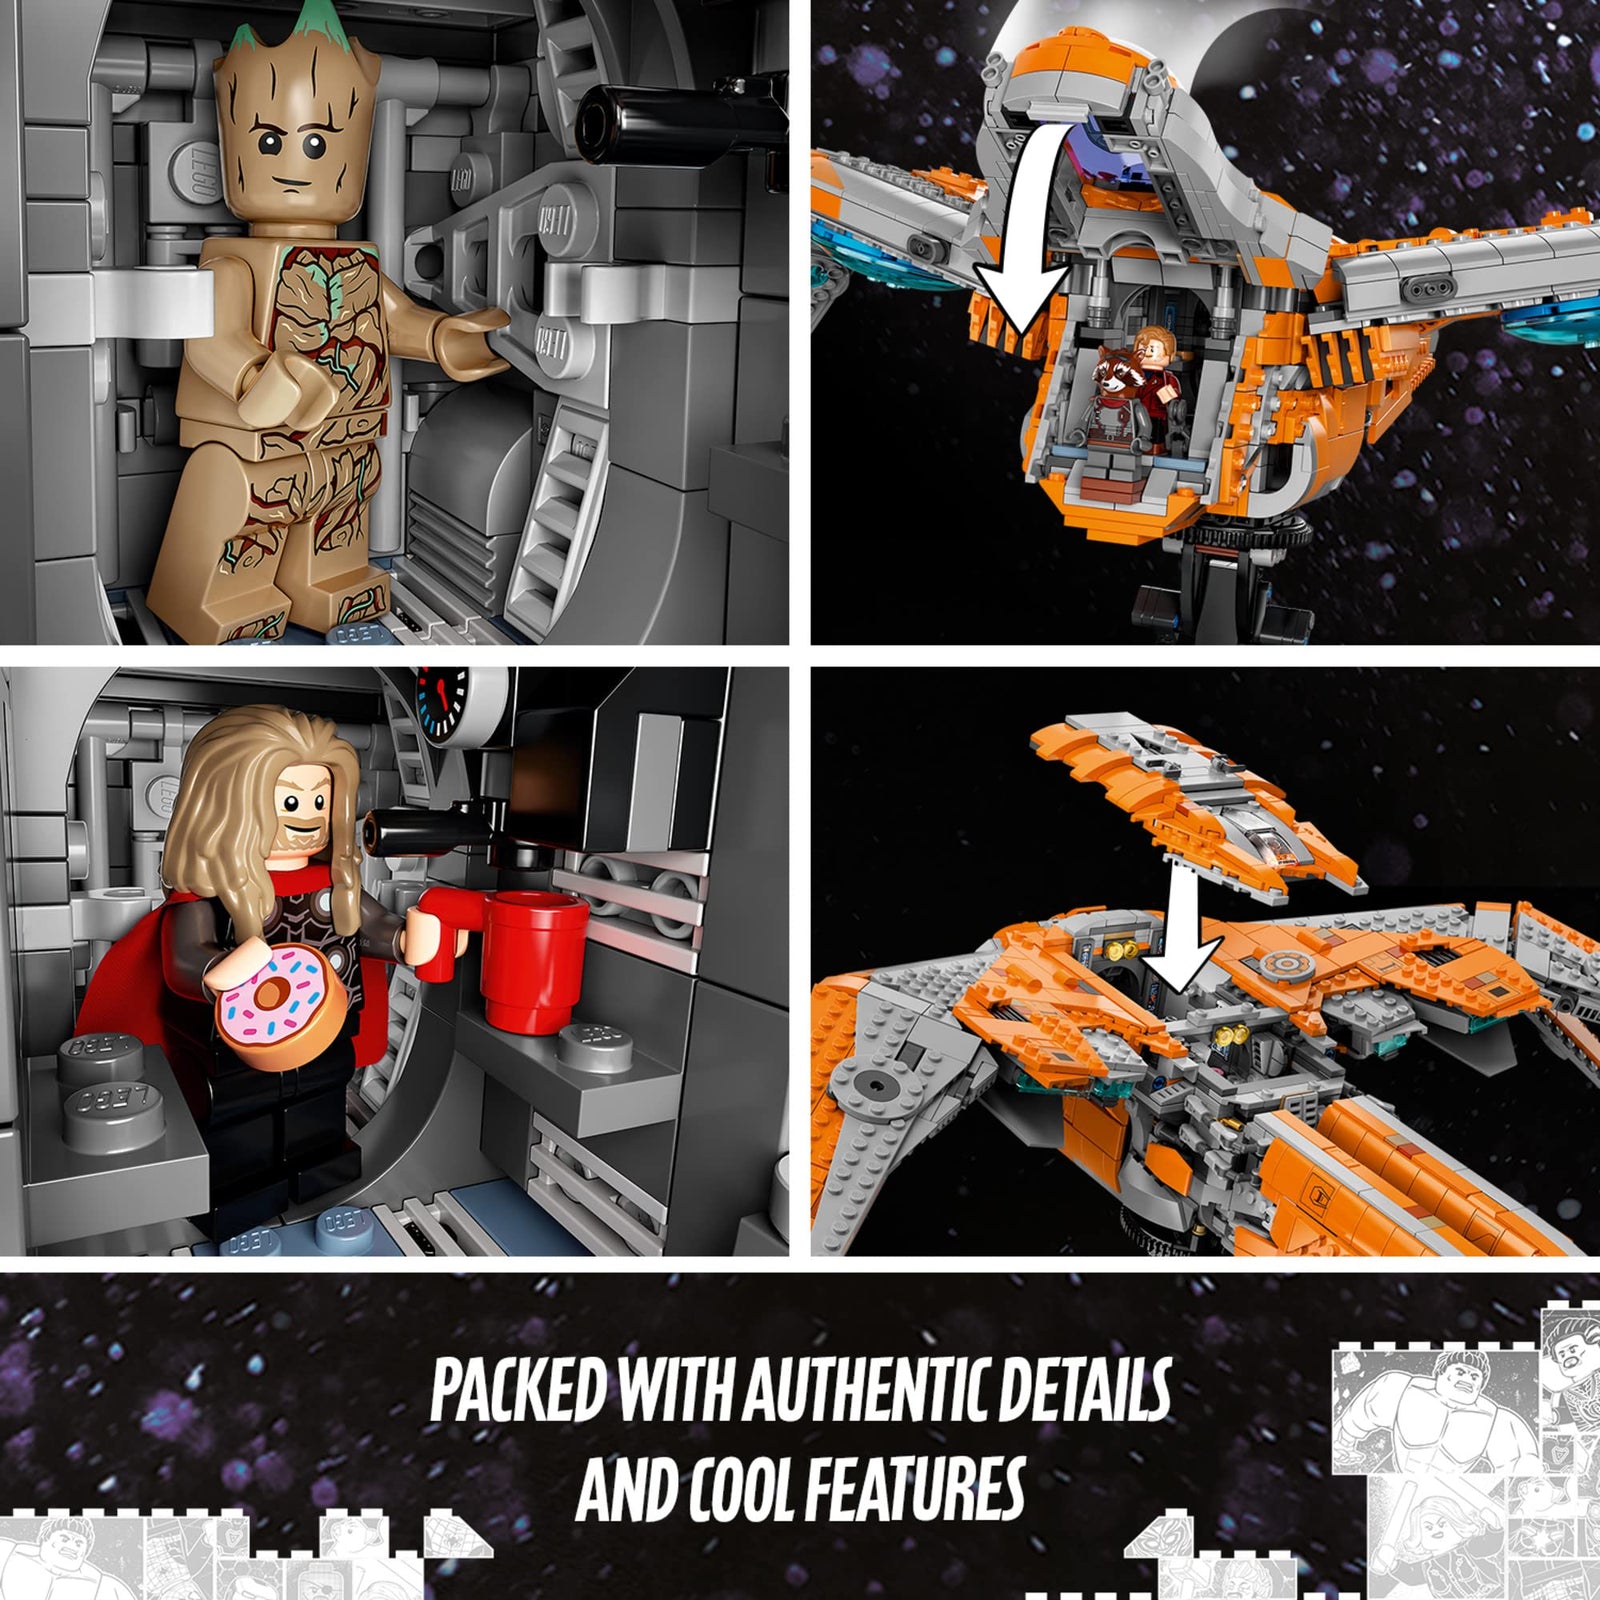 LEGO Marvel The Guardians’ Ship 76193 Space Battleship Building Kit; 6 Minifigures Include Star-Lord and Thor; New 2021 (1,901 Pieces)